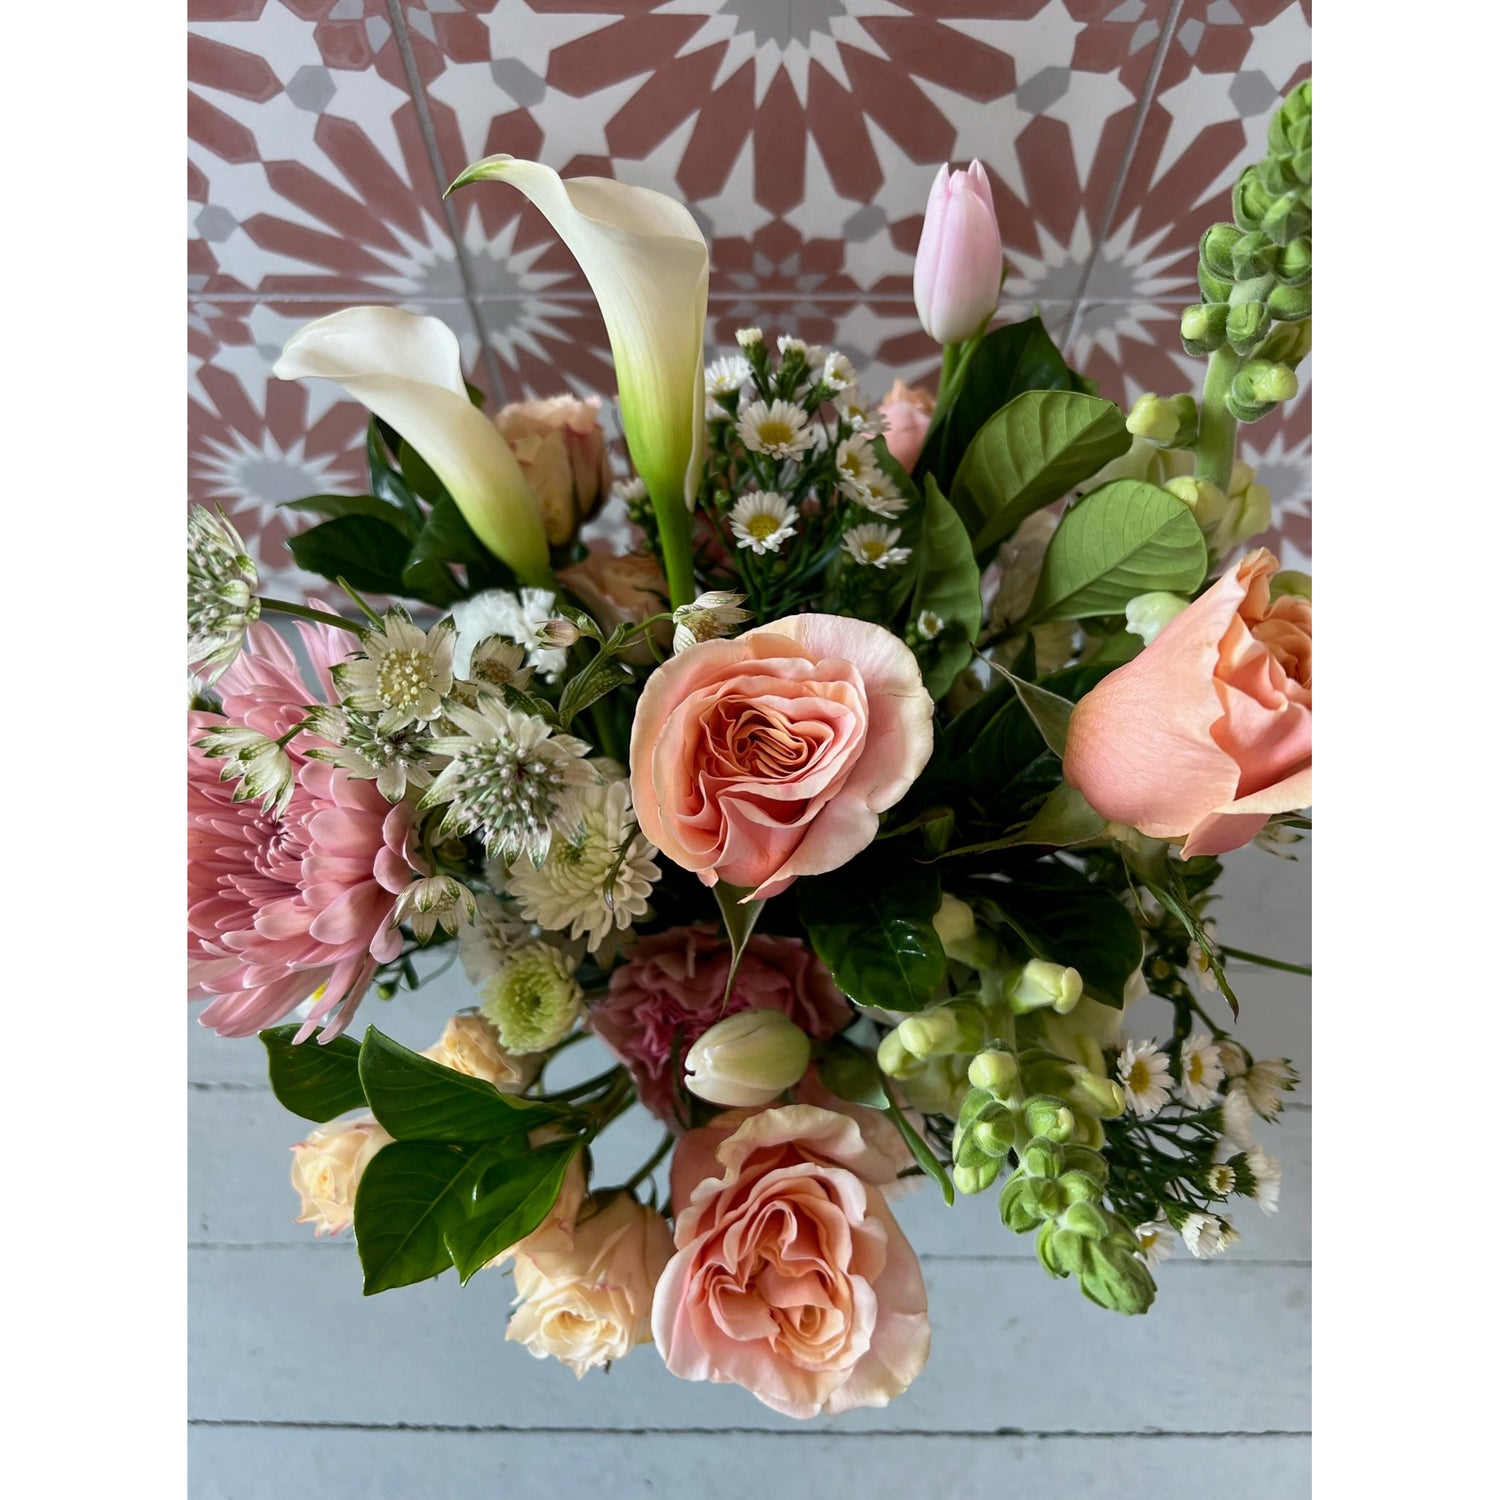 A Year of Flowers Subscription